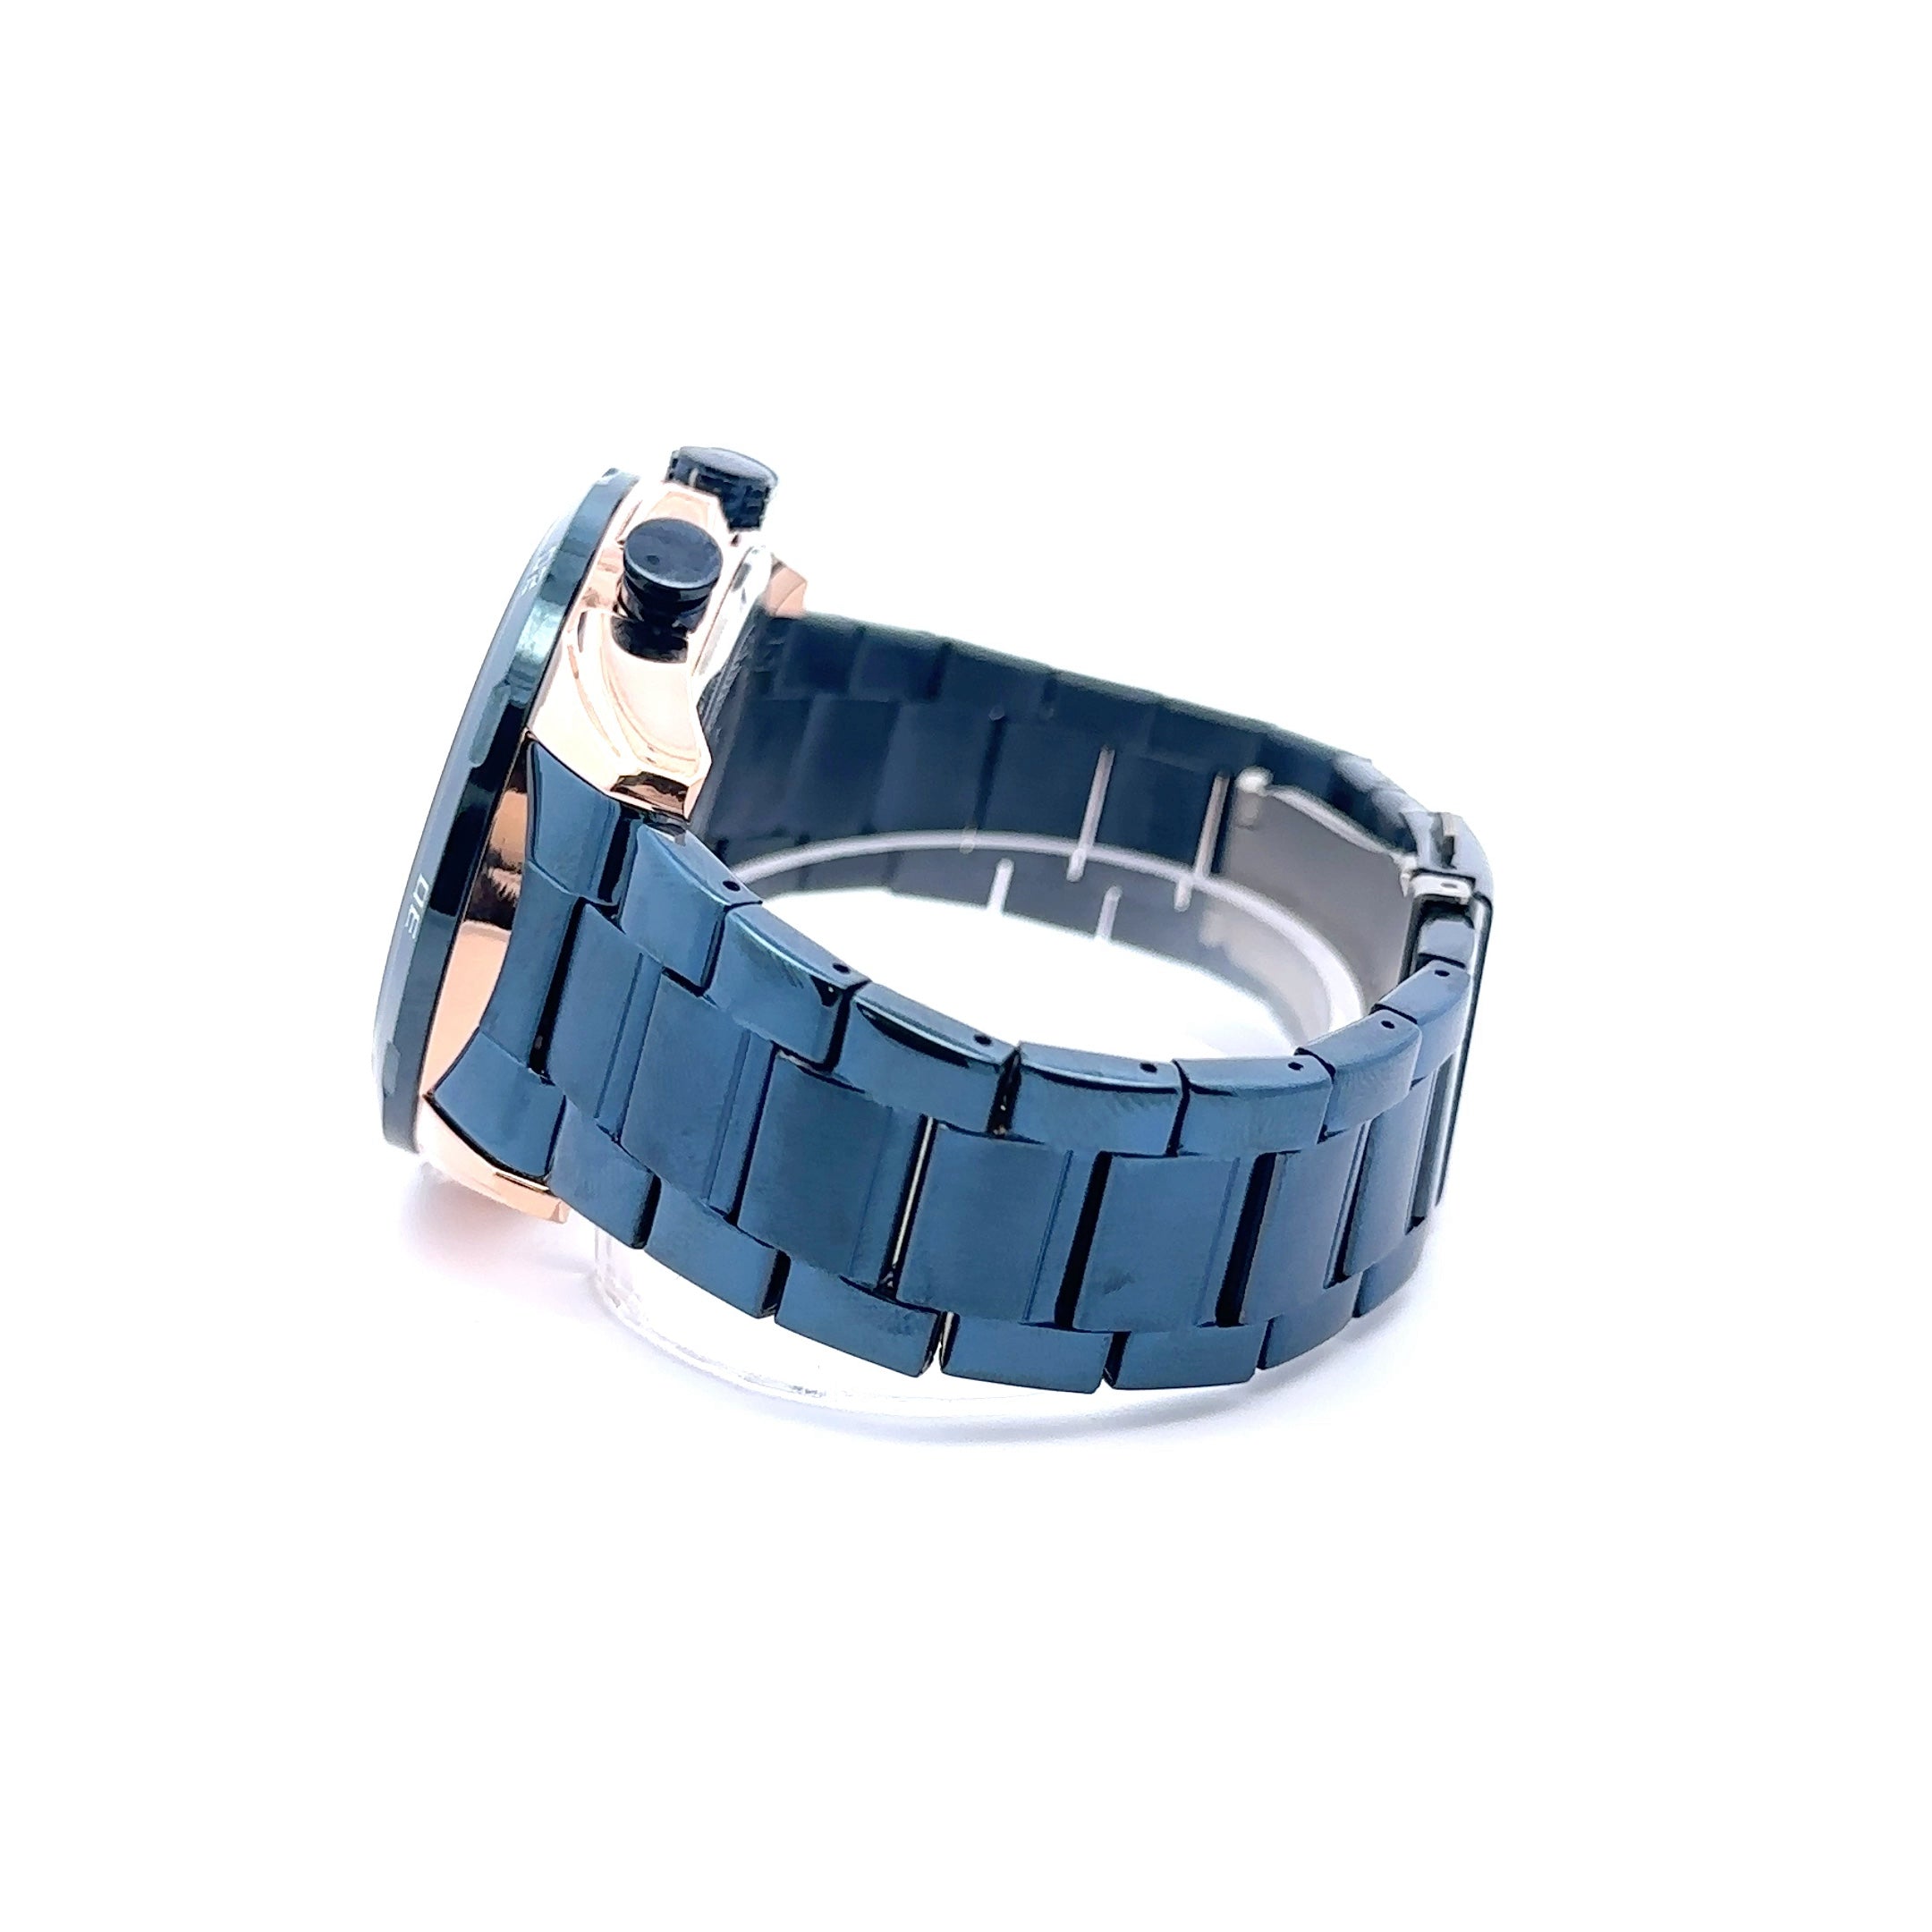 SOLIVAGANT METAL BACK BLUE STAINLESS ICED OUT WATCH I 5517813